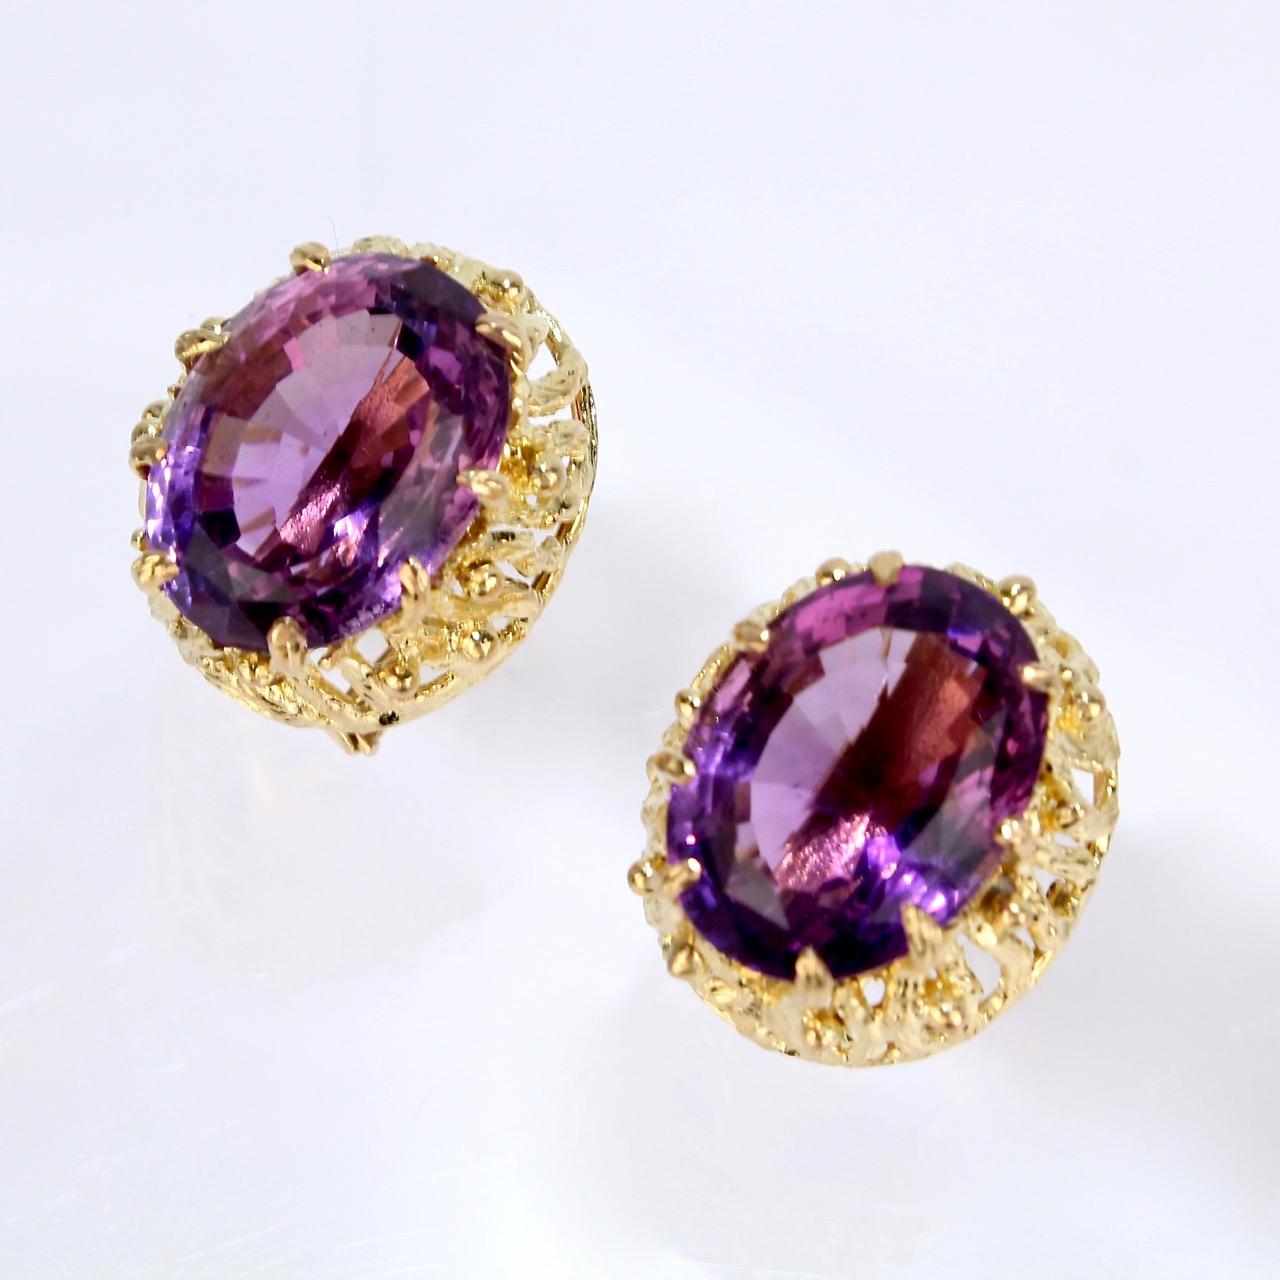 A very good pair of large 14k gold Brutalist omega clip earrings.

Each with a substantial oval-cut amethyst gemstones (10+ carat) prong set in a sinuous, intertwined structural 14k gold Brutalist setting. The gold settings have ample openwork that